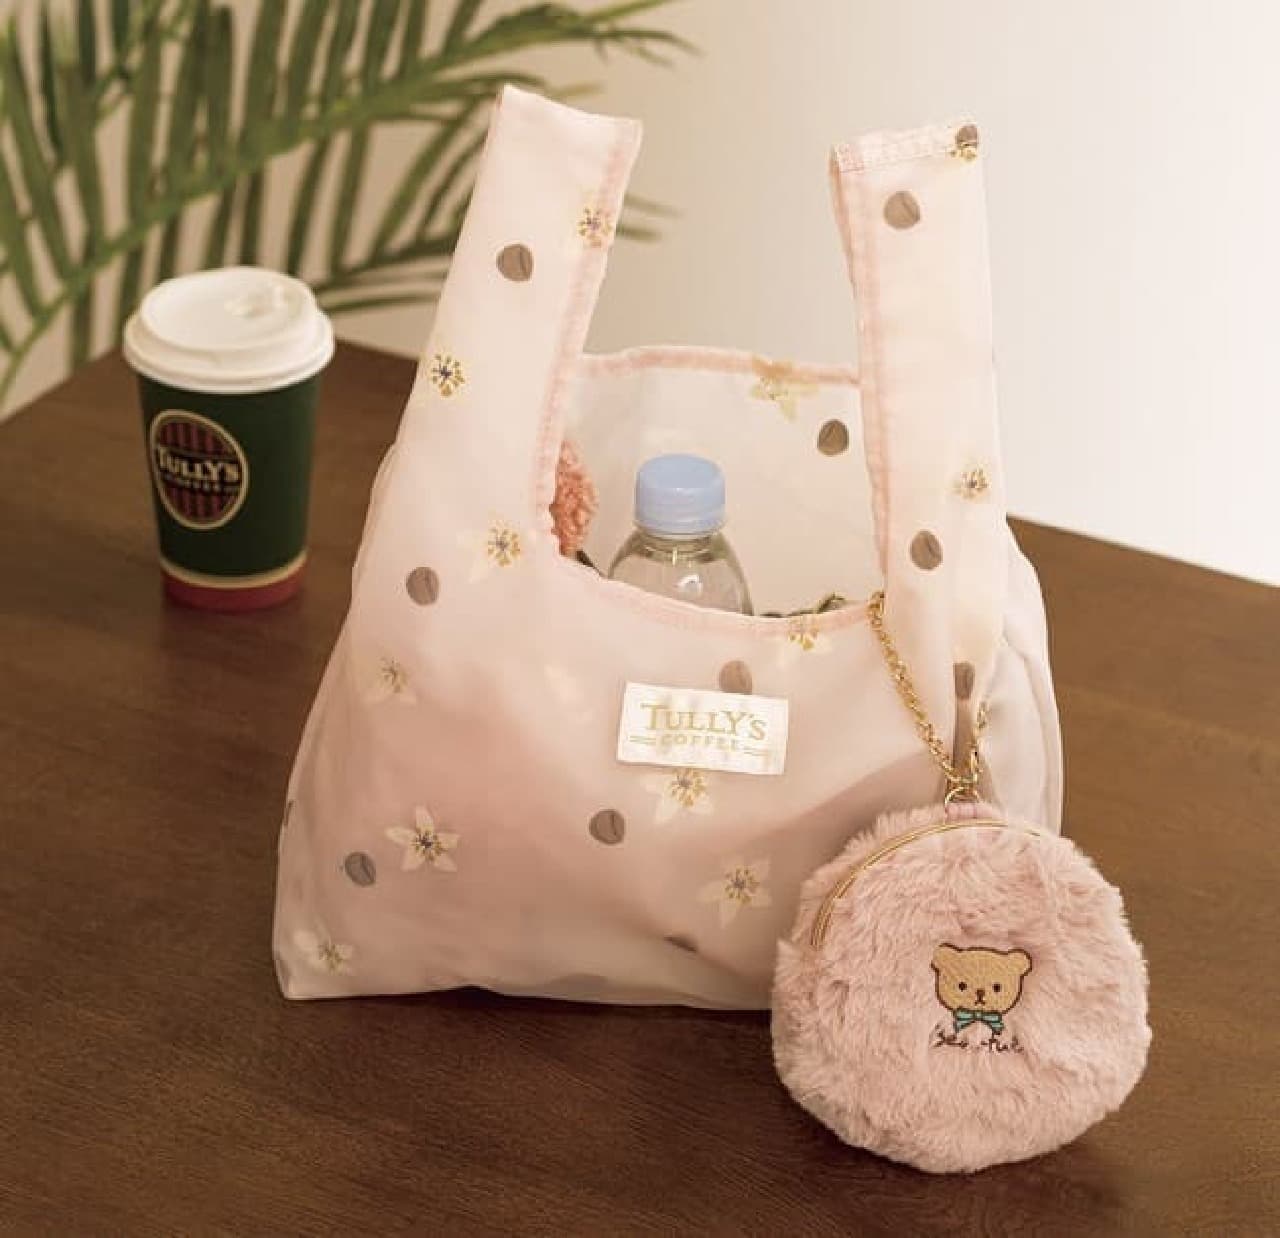 From Tully's such as "Bearful Mini Mini Tote" --Fluffy cute teddy bear goods